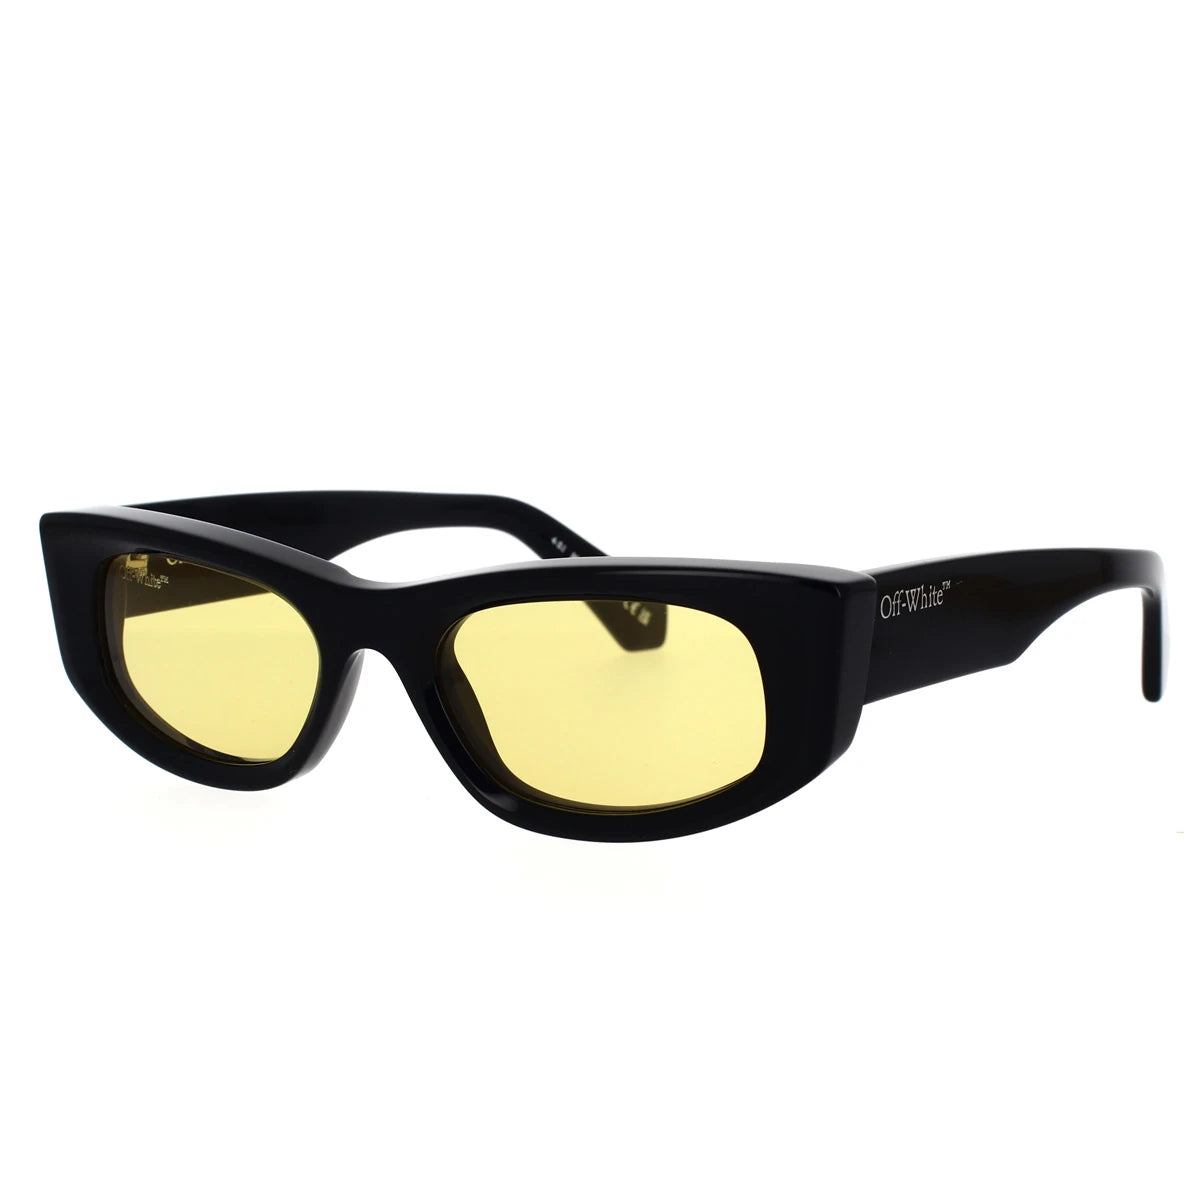 Sunglasses OFF-WHITE Woman color Yellow